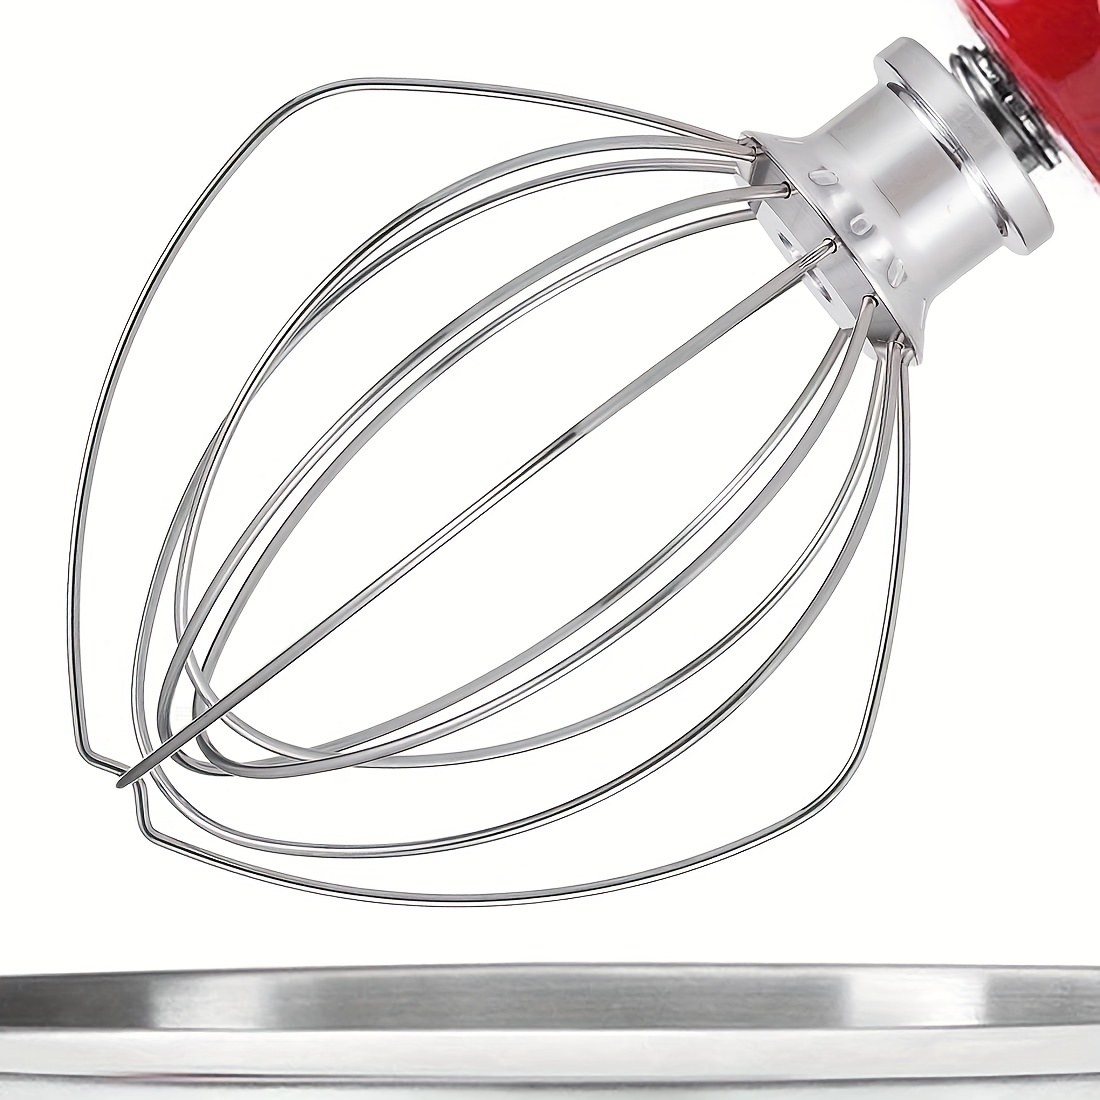 KN211WW by KitchenAid - 11-Wire Whip Bowl-Lift Stand Mixer Attachment